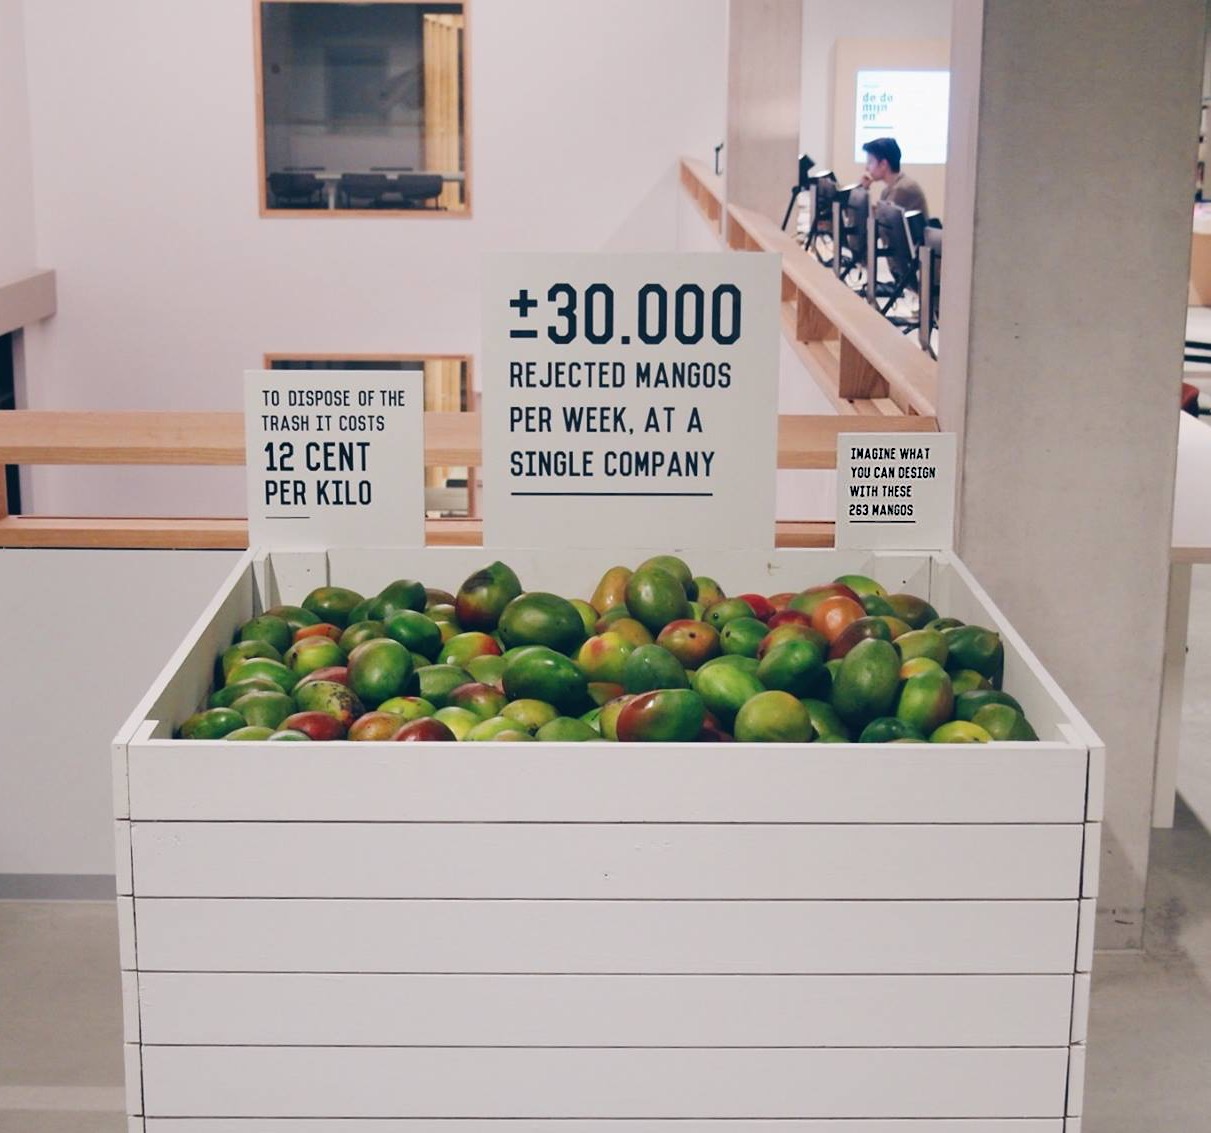 The vision at Fruitleather Rotterdam is not only to spread awareness of the food waste issue, but also to show how waste in general can be used in a positive way.